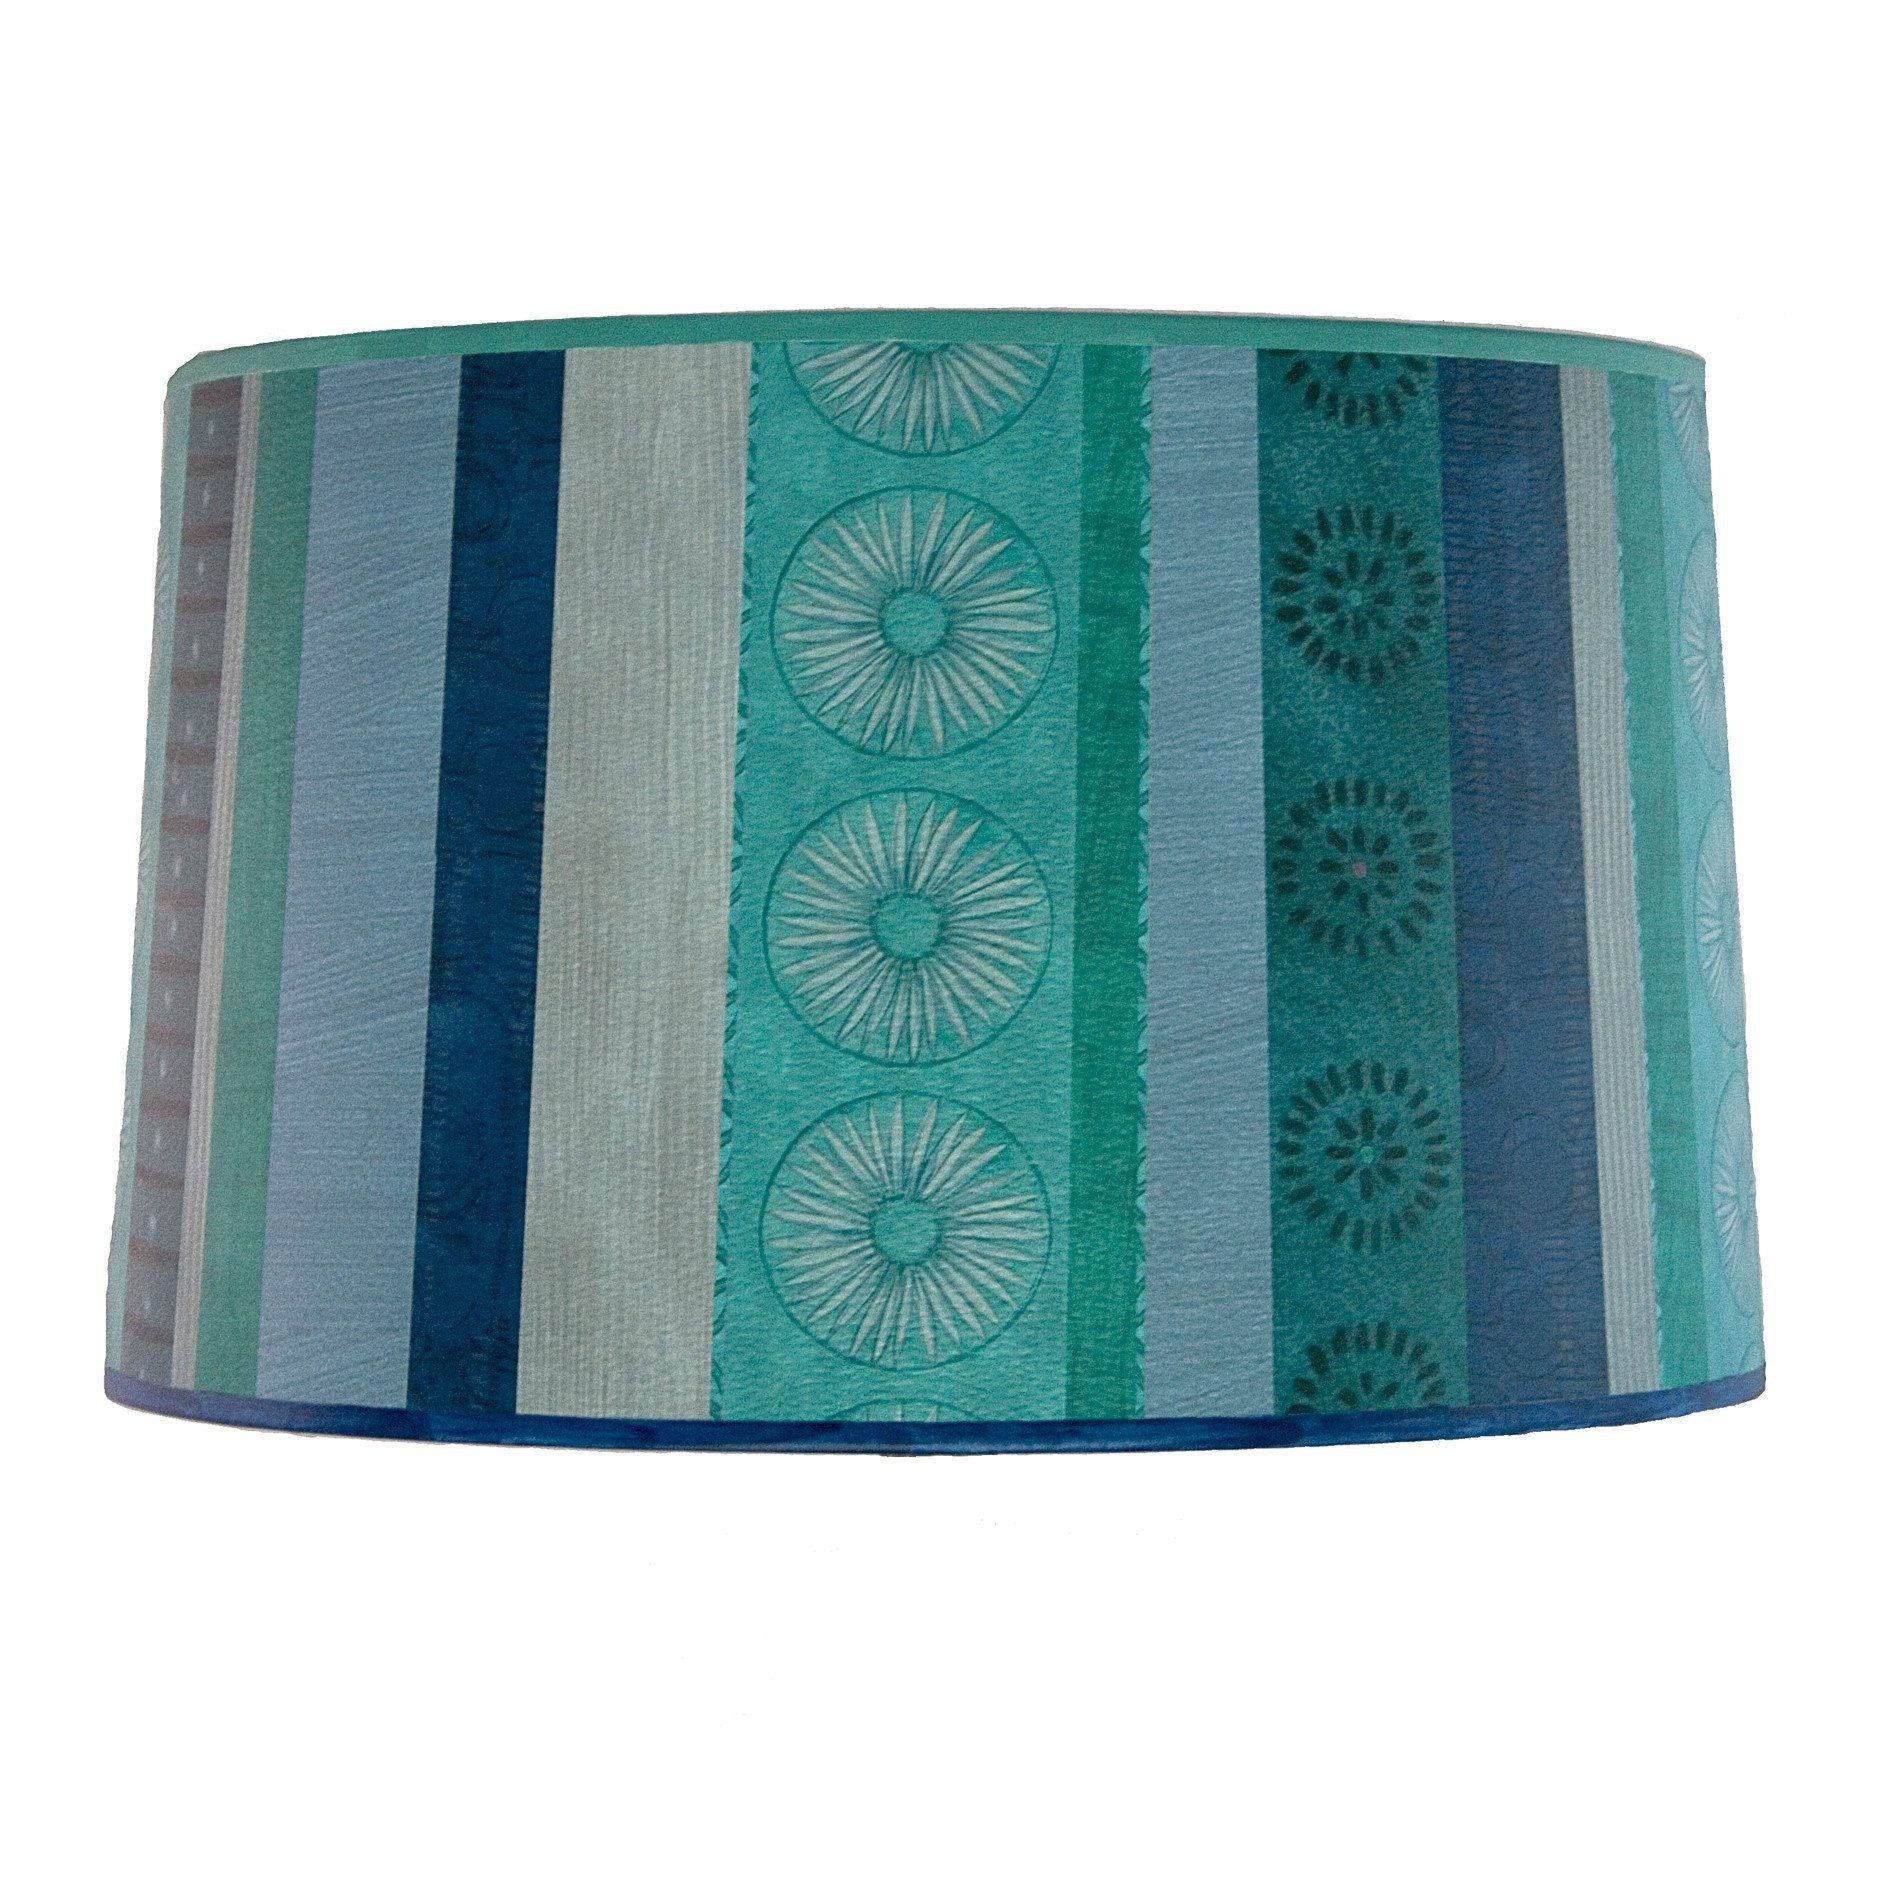 Janna Ugone & Co Lamp Shades Large Drum Lamp Shade in Serape Waters